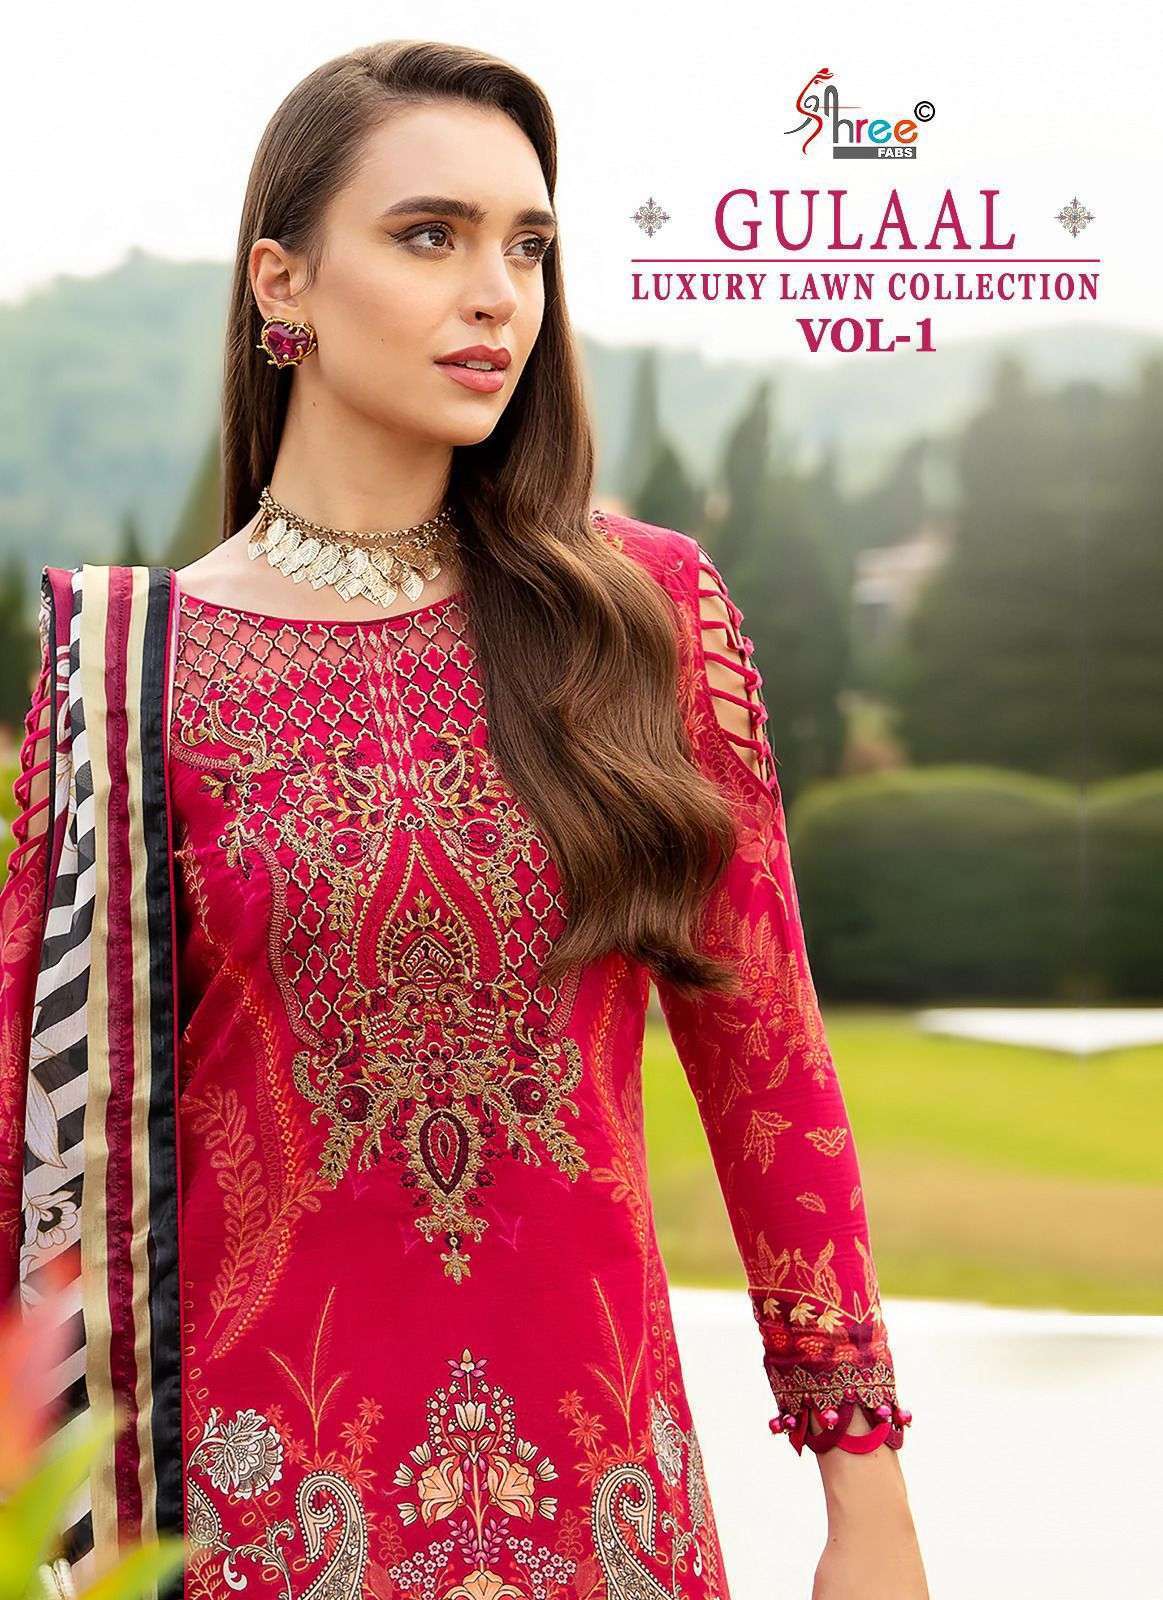 SHREE FABS GULAAL LUXURY LAWN COLLECTION VOL 1